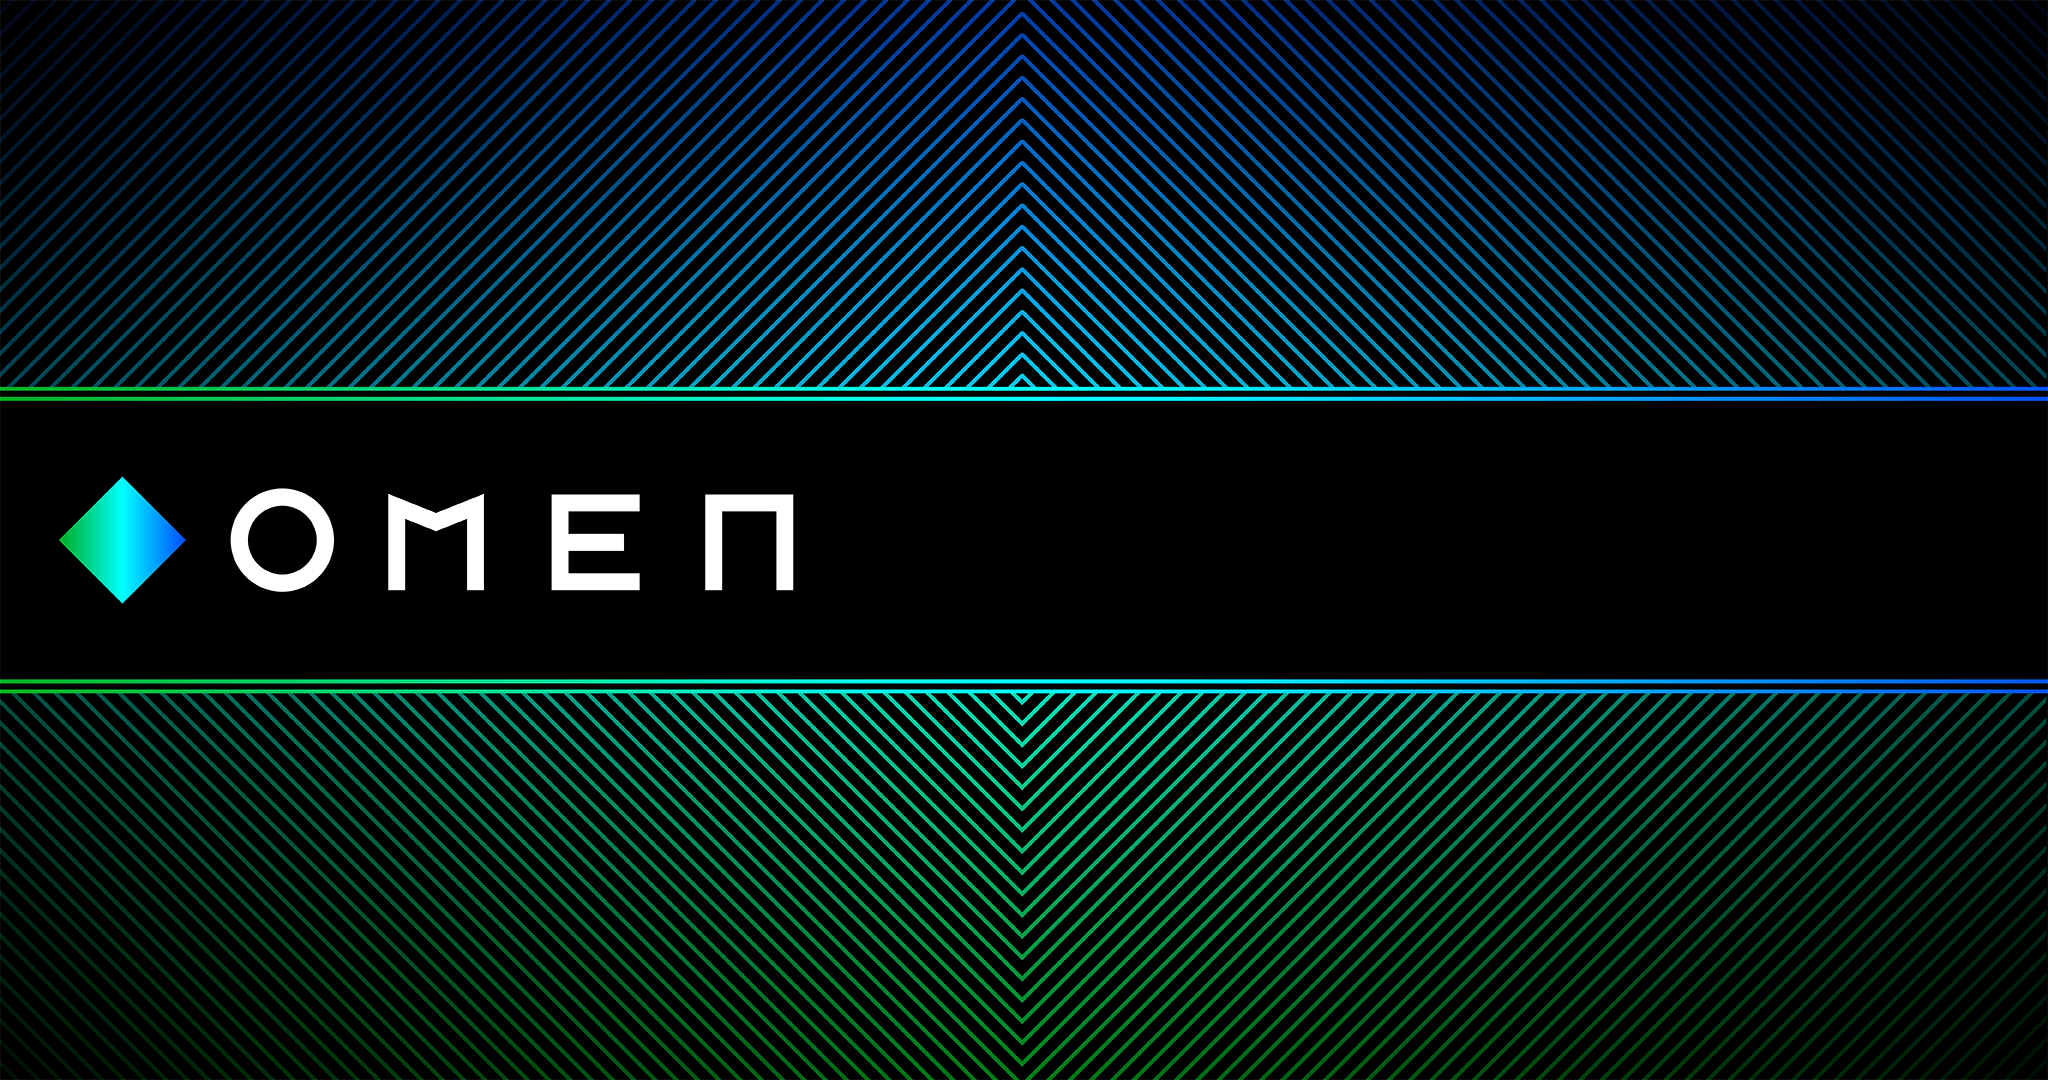 Even more Omen wallpaper i inverted the colors of so it could fit the new logo